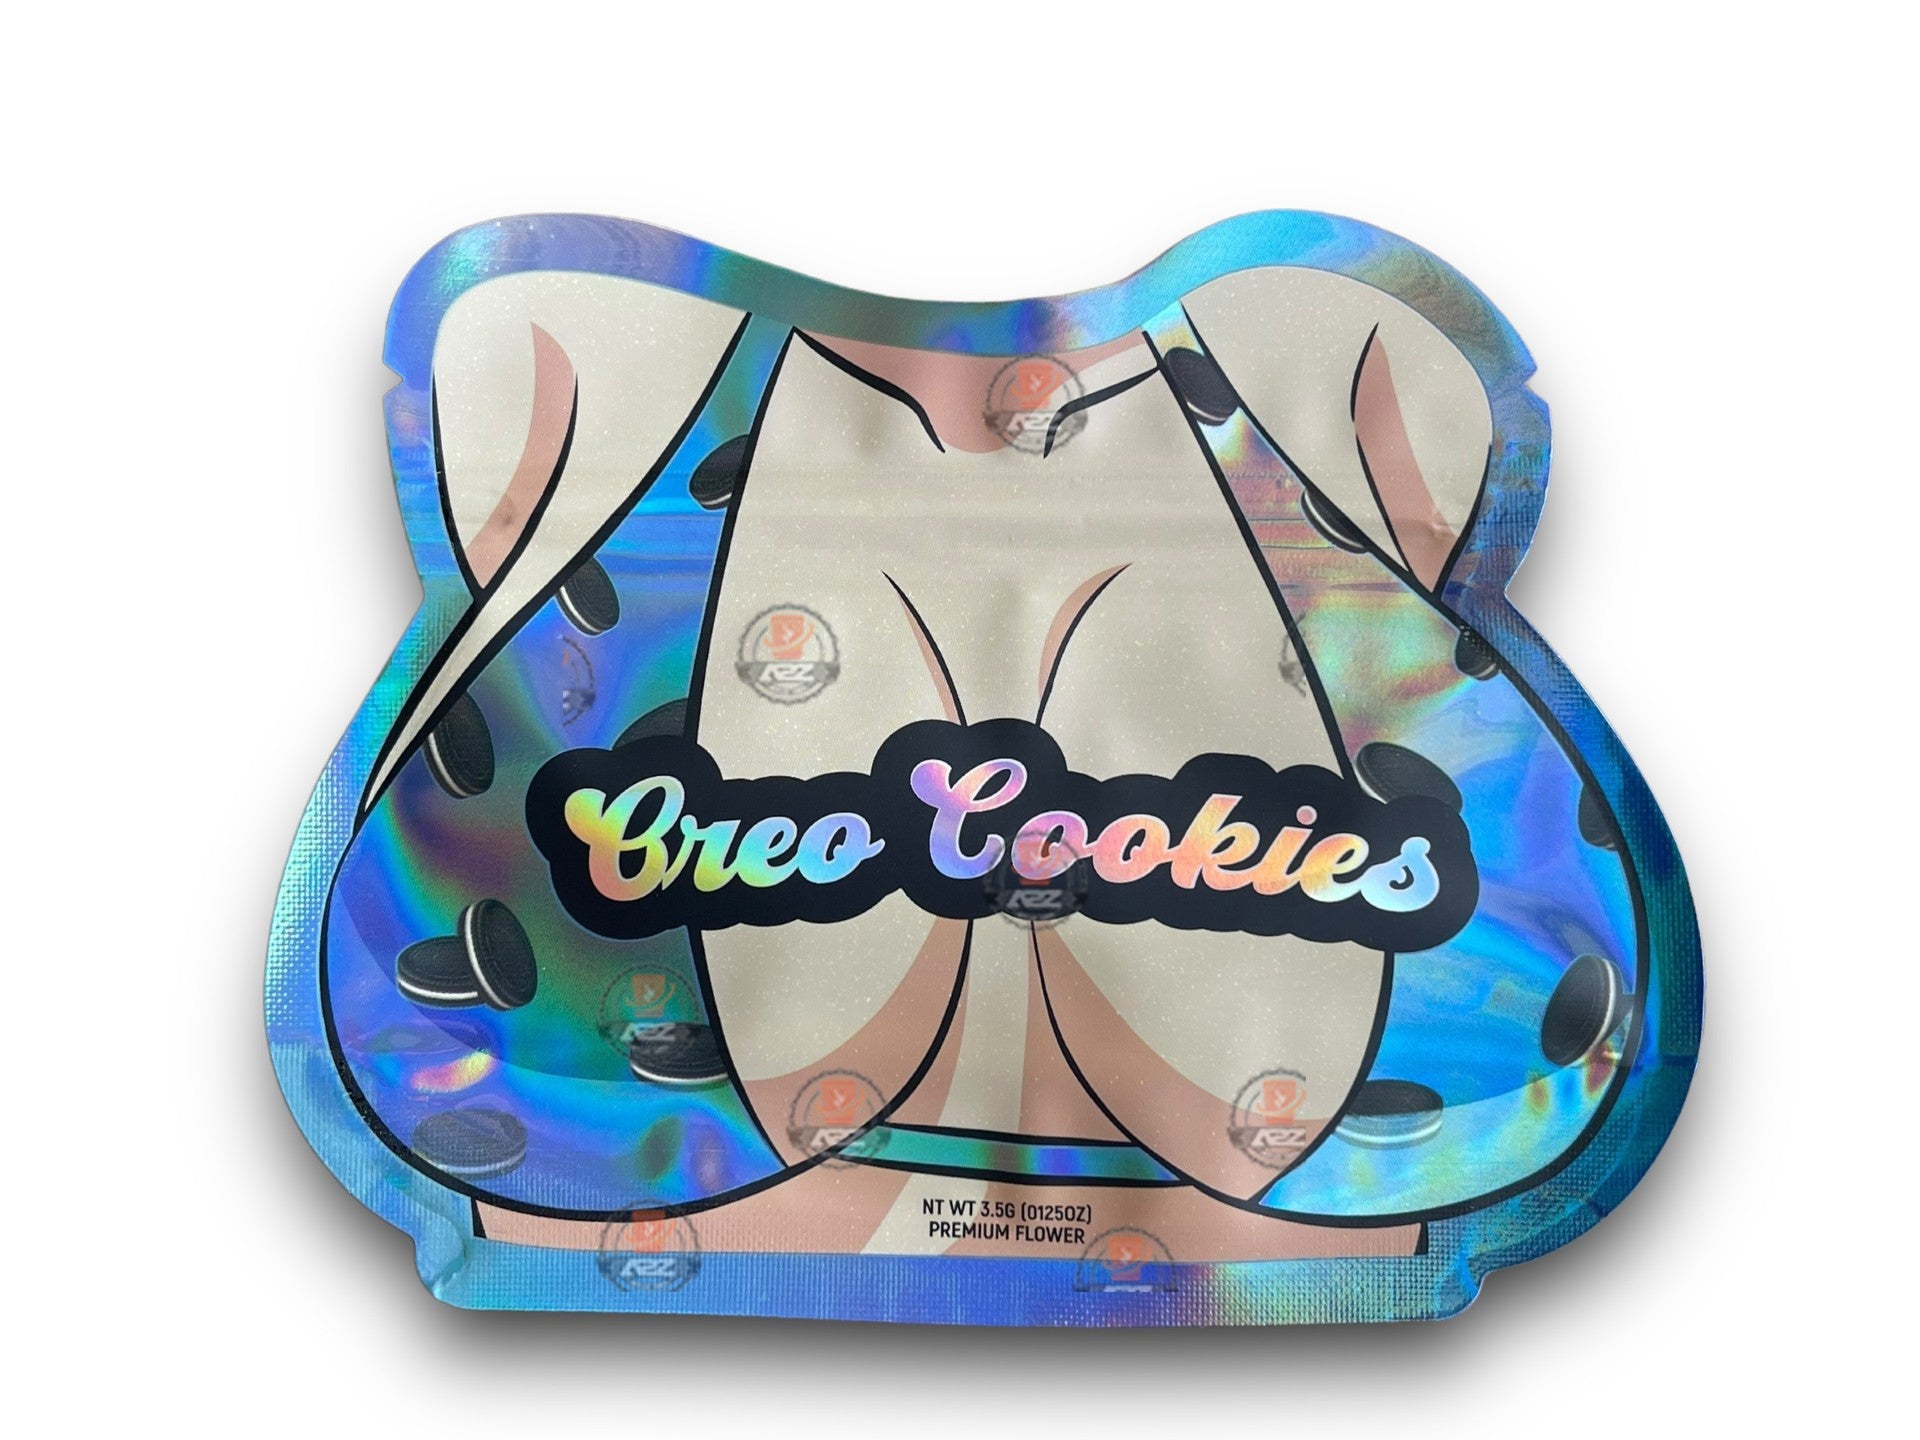 Cookies 3.5G Mylar Bags Holographic cut out